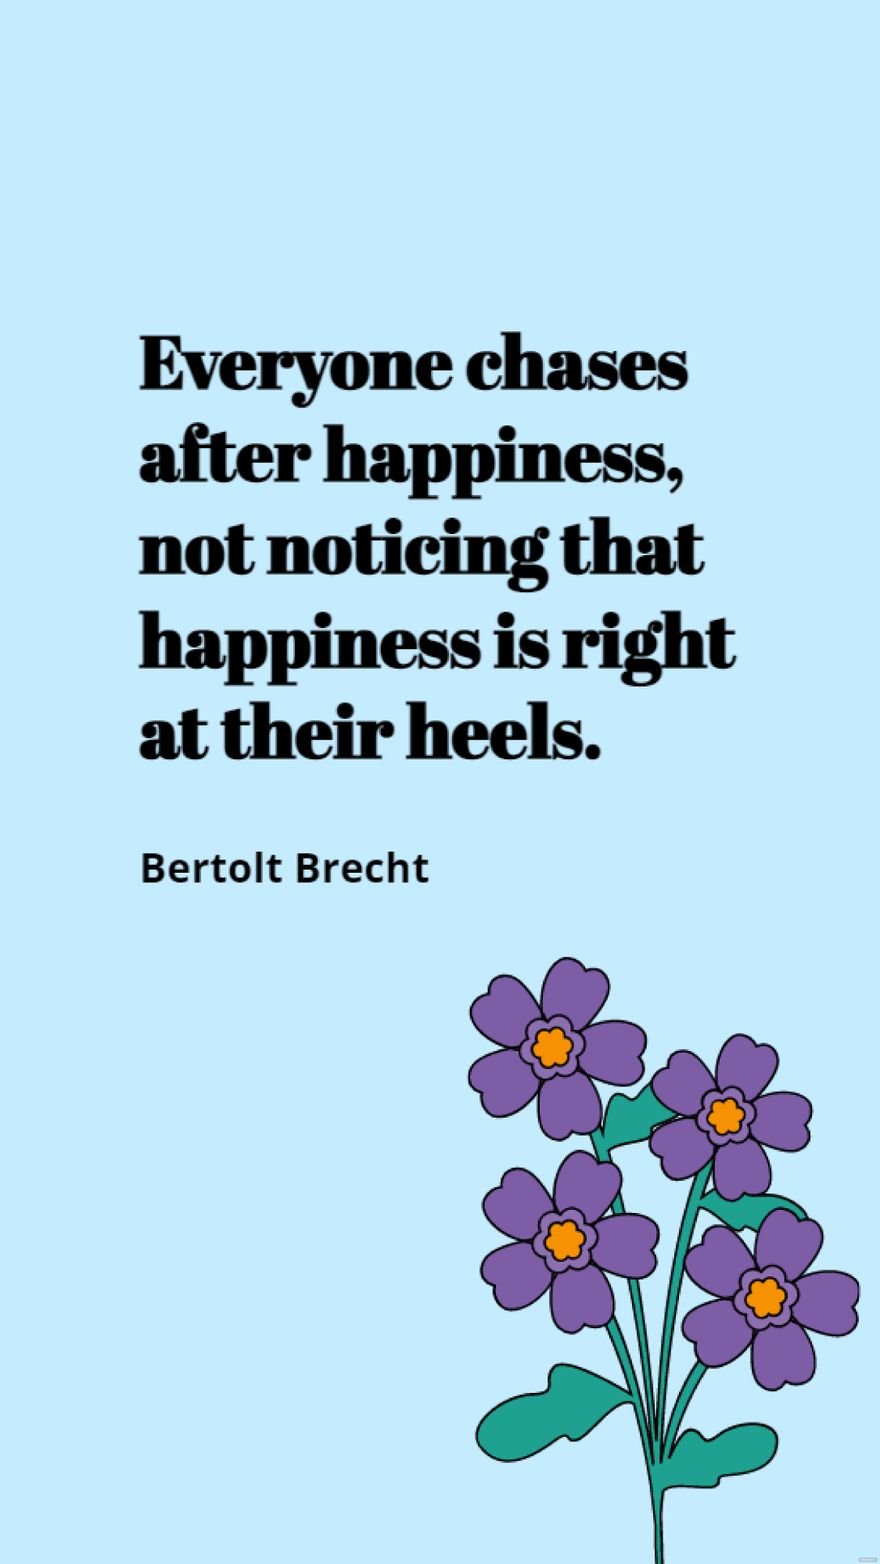 Bertolt Brecht - Everyone chases after happiness, not noticing that happiness is right at their heels.